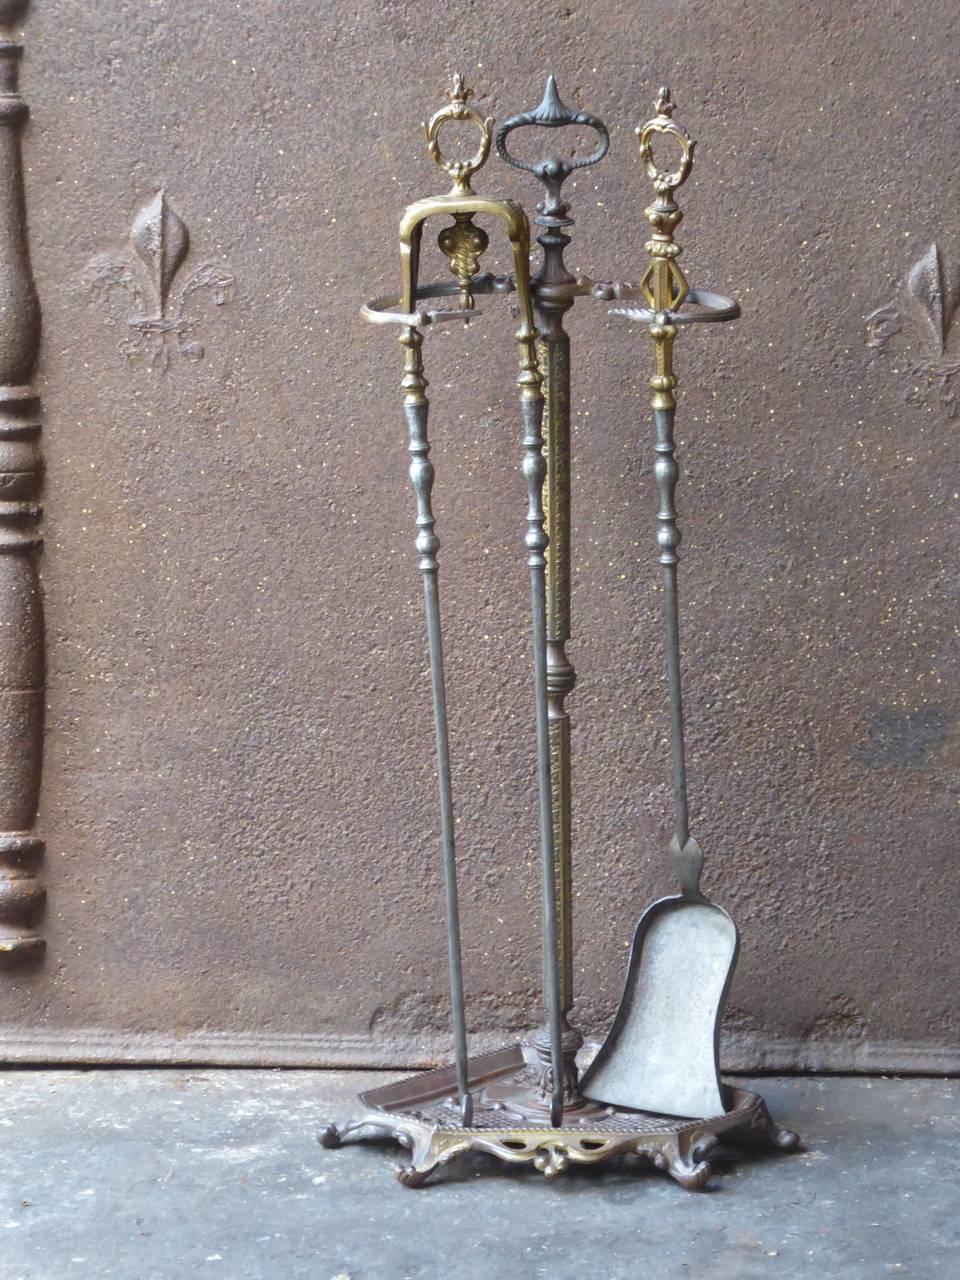 19th century French Napoleon III fireplace tool set - fire irons made of wrought iron and brass.

We have a unique and specialized collection of antique and used fireplace accessories consisting of more than 1000 listings at 1stdibs. Amongst others